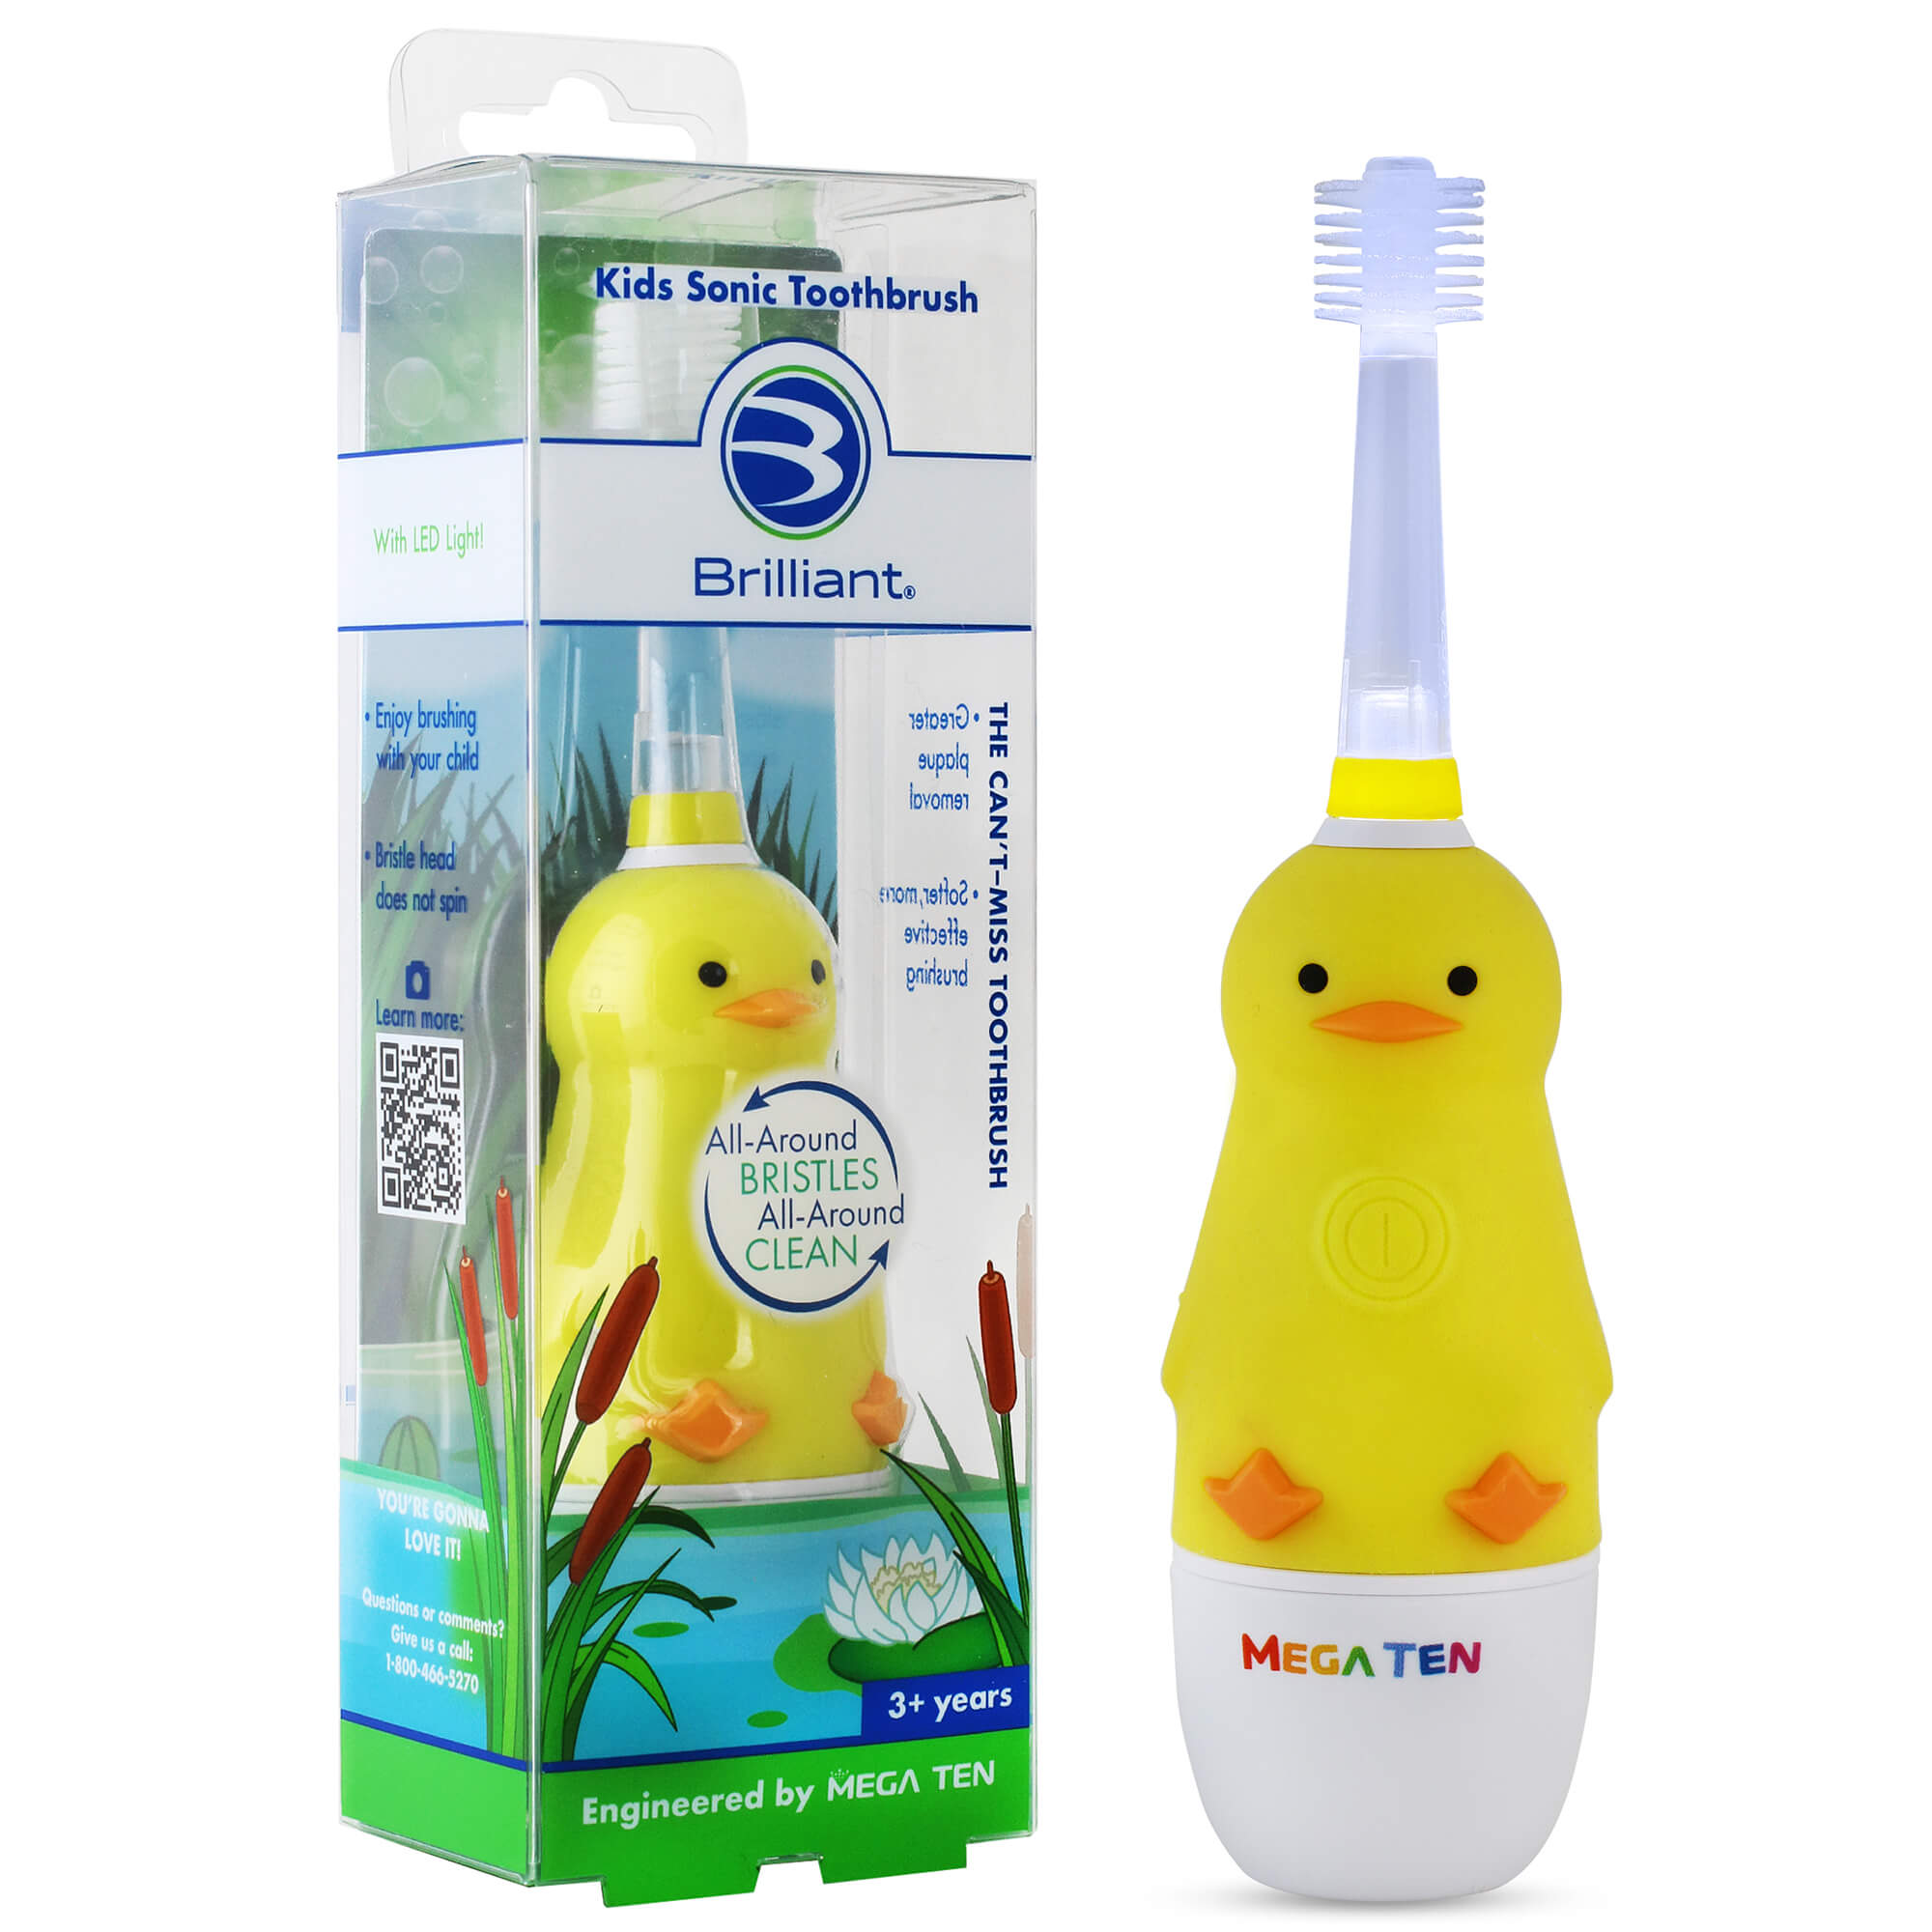 Brilliant Kids Electric Battery Toothbrush with Sonic Technology - image 1 of 9